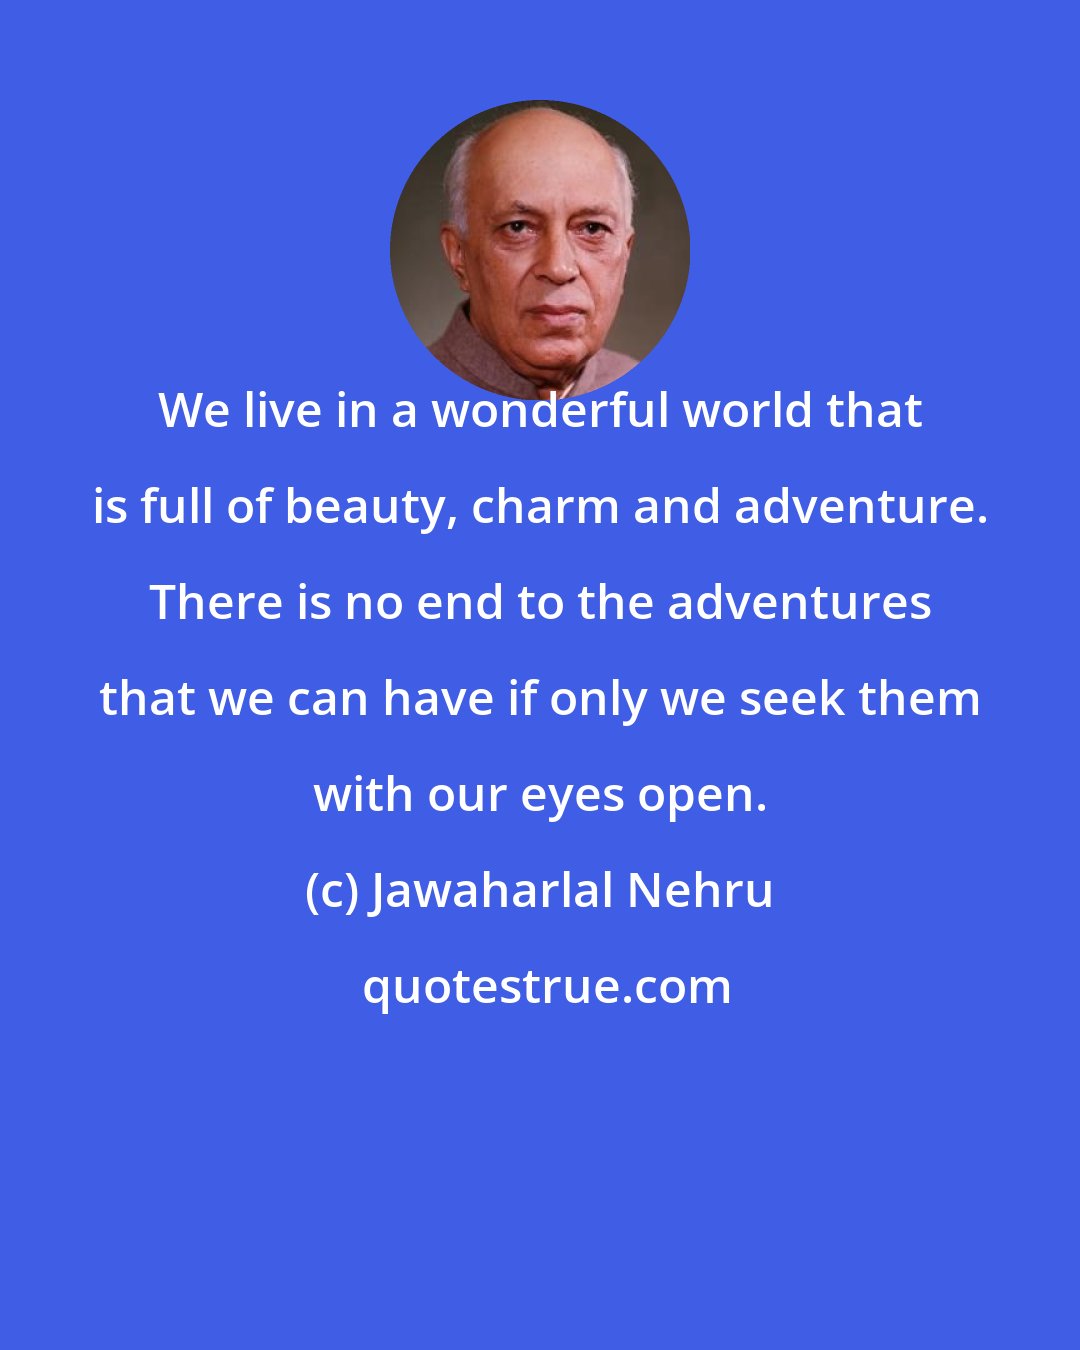 Jawaharlal Nehru: We live in a wonderful world that is full of beauty, charm and adventure. There is no end to the adventures that we can have if only we seek them with our eyes open.